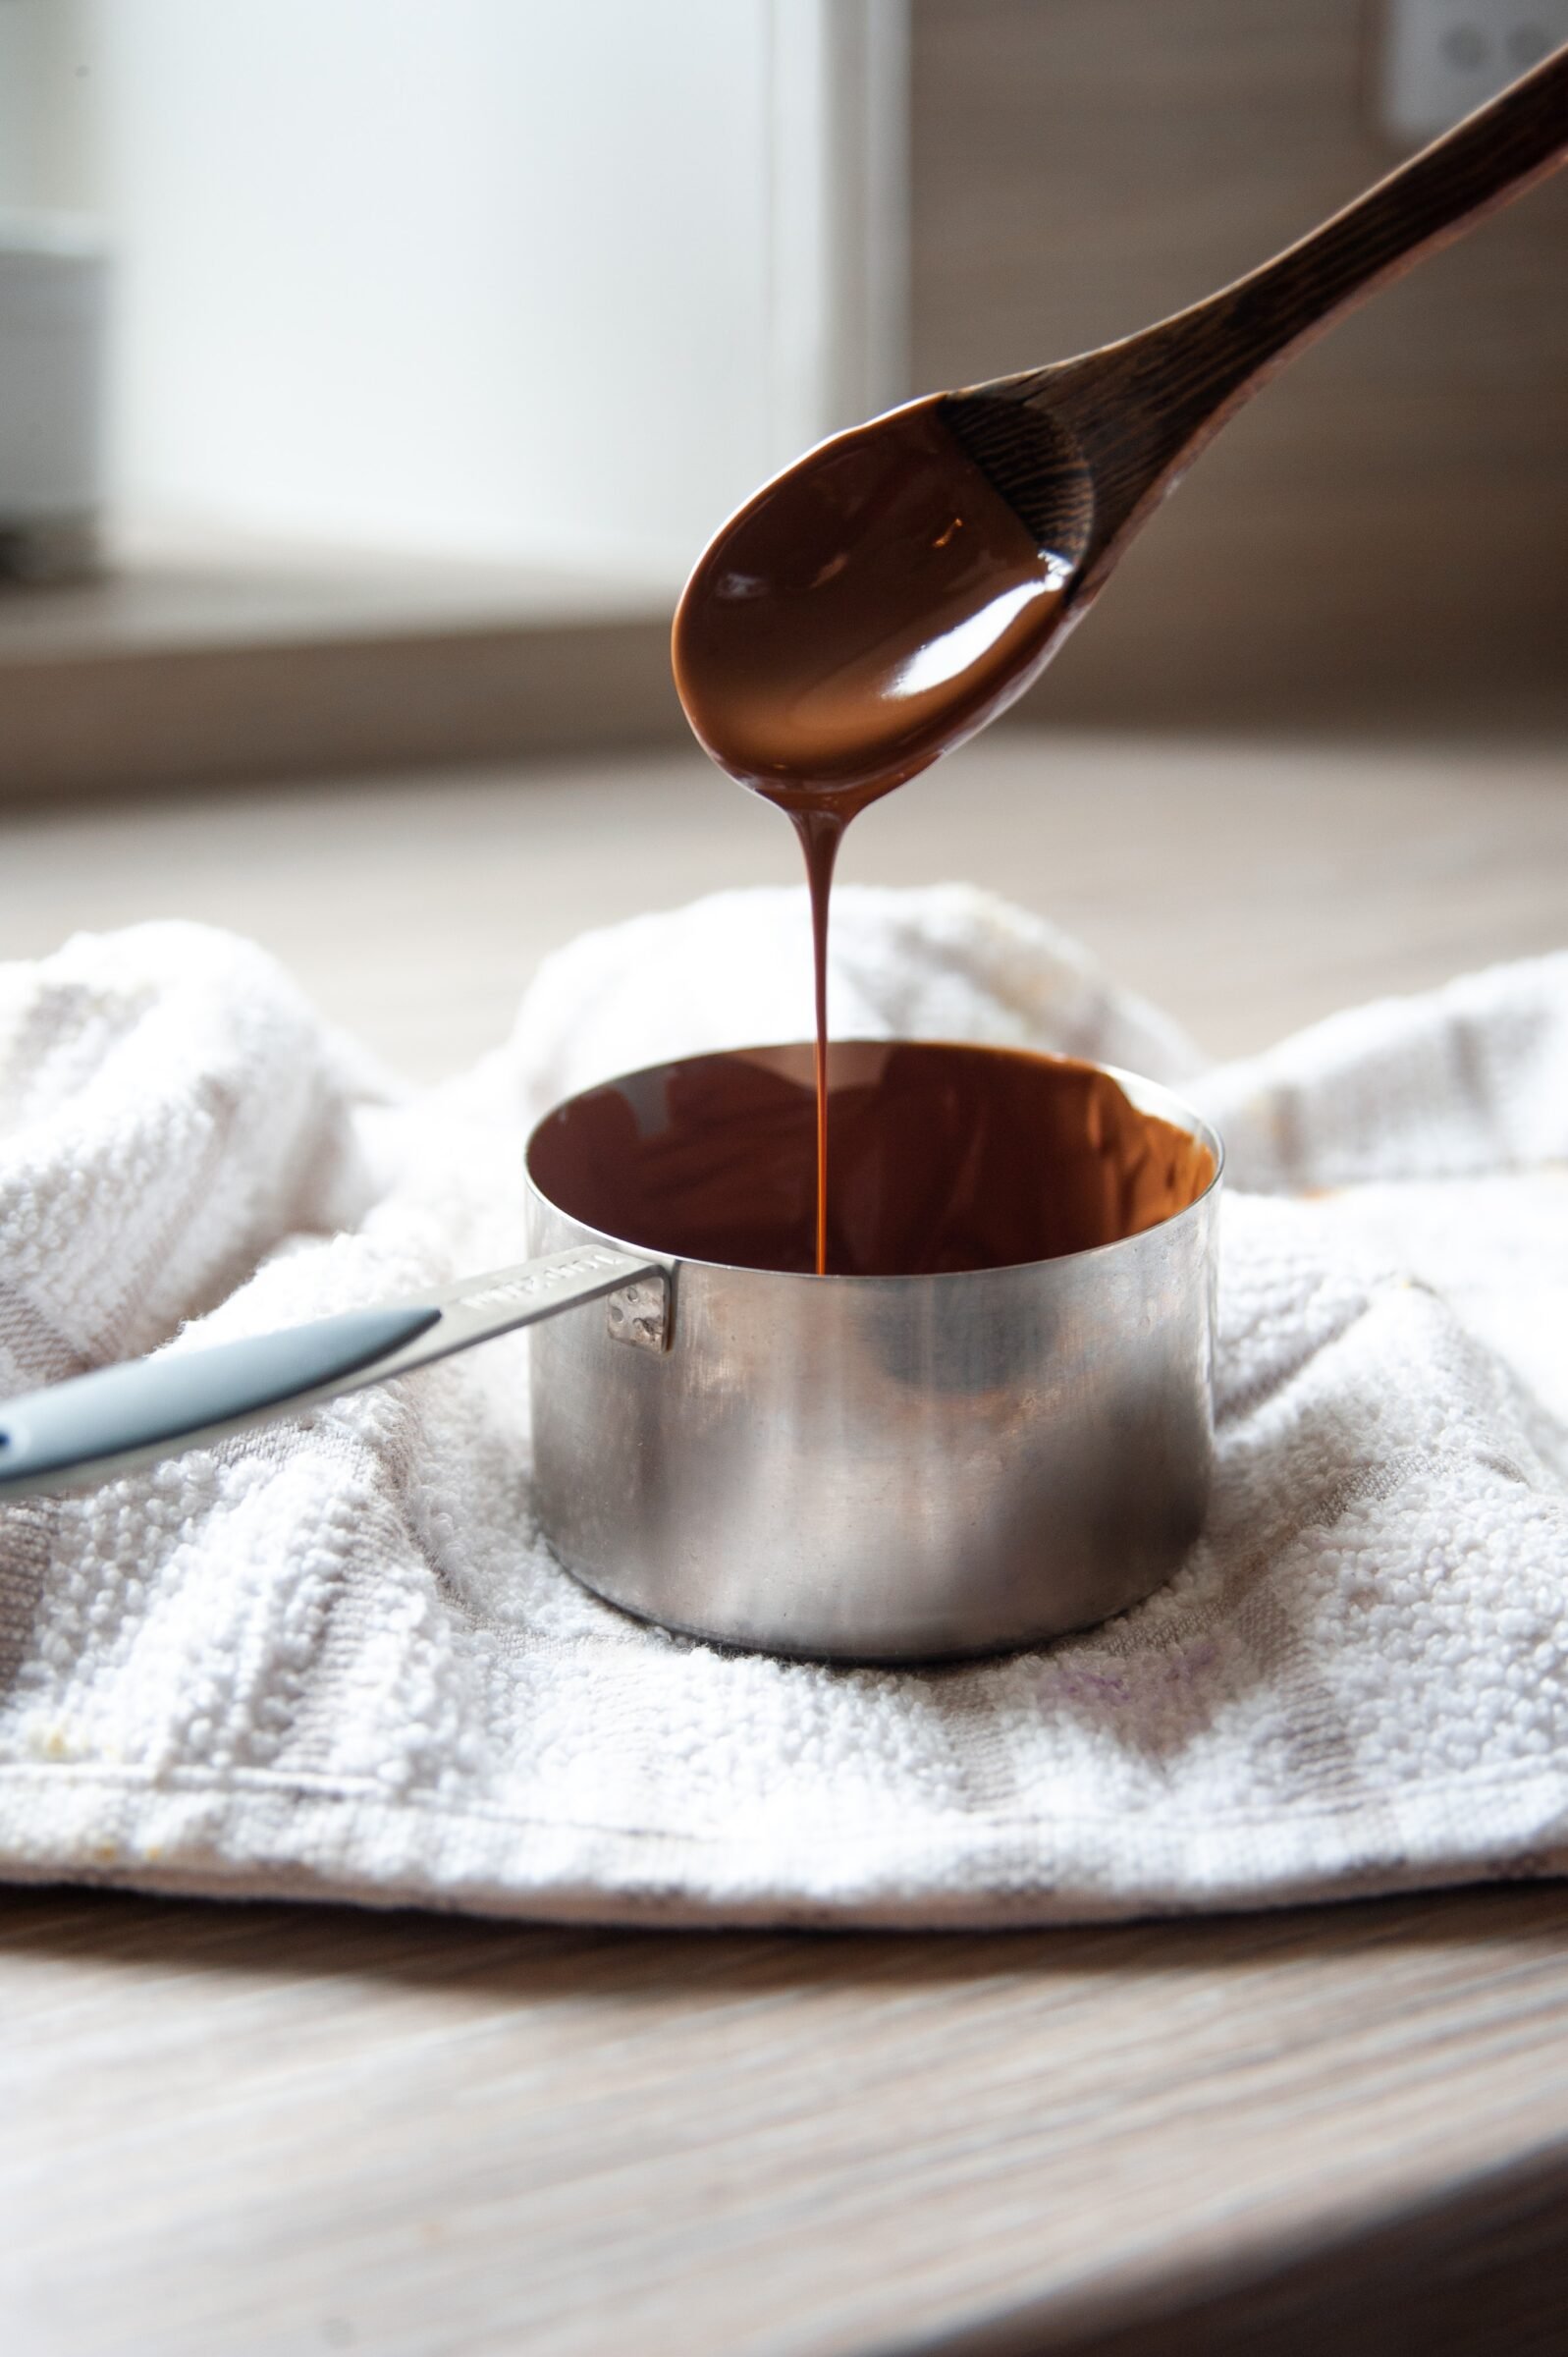 a saucepan of melted chocolate sits on a white towel. molten chocolate drizzles from a wooden spoon into the pan.